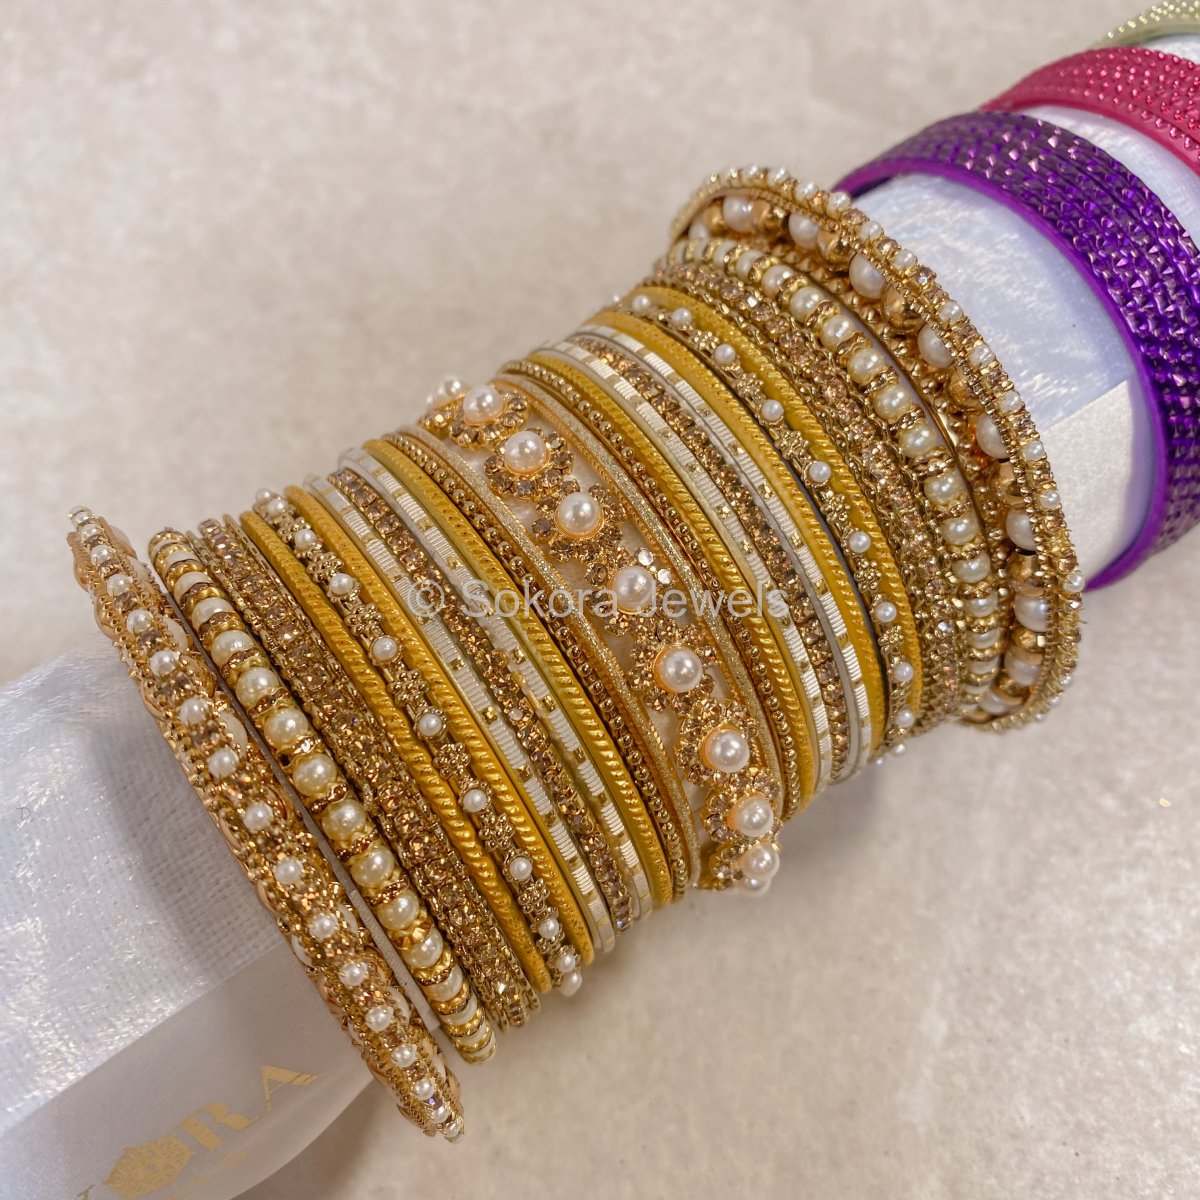 (Slightly less than perfect) Clearance Bangle Stack for One Arm with Extra Colours - 2.4 - SOKORA JEWELS(Slightly less than perfect) Clearance Bangle Stack for One Arm with Extra Colours - 2.4BANGLES